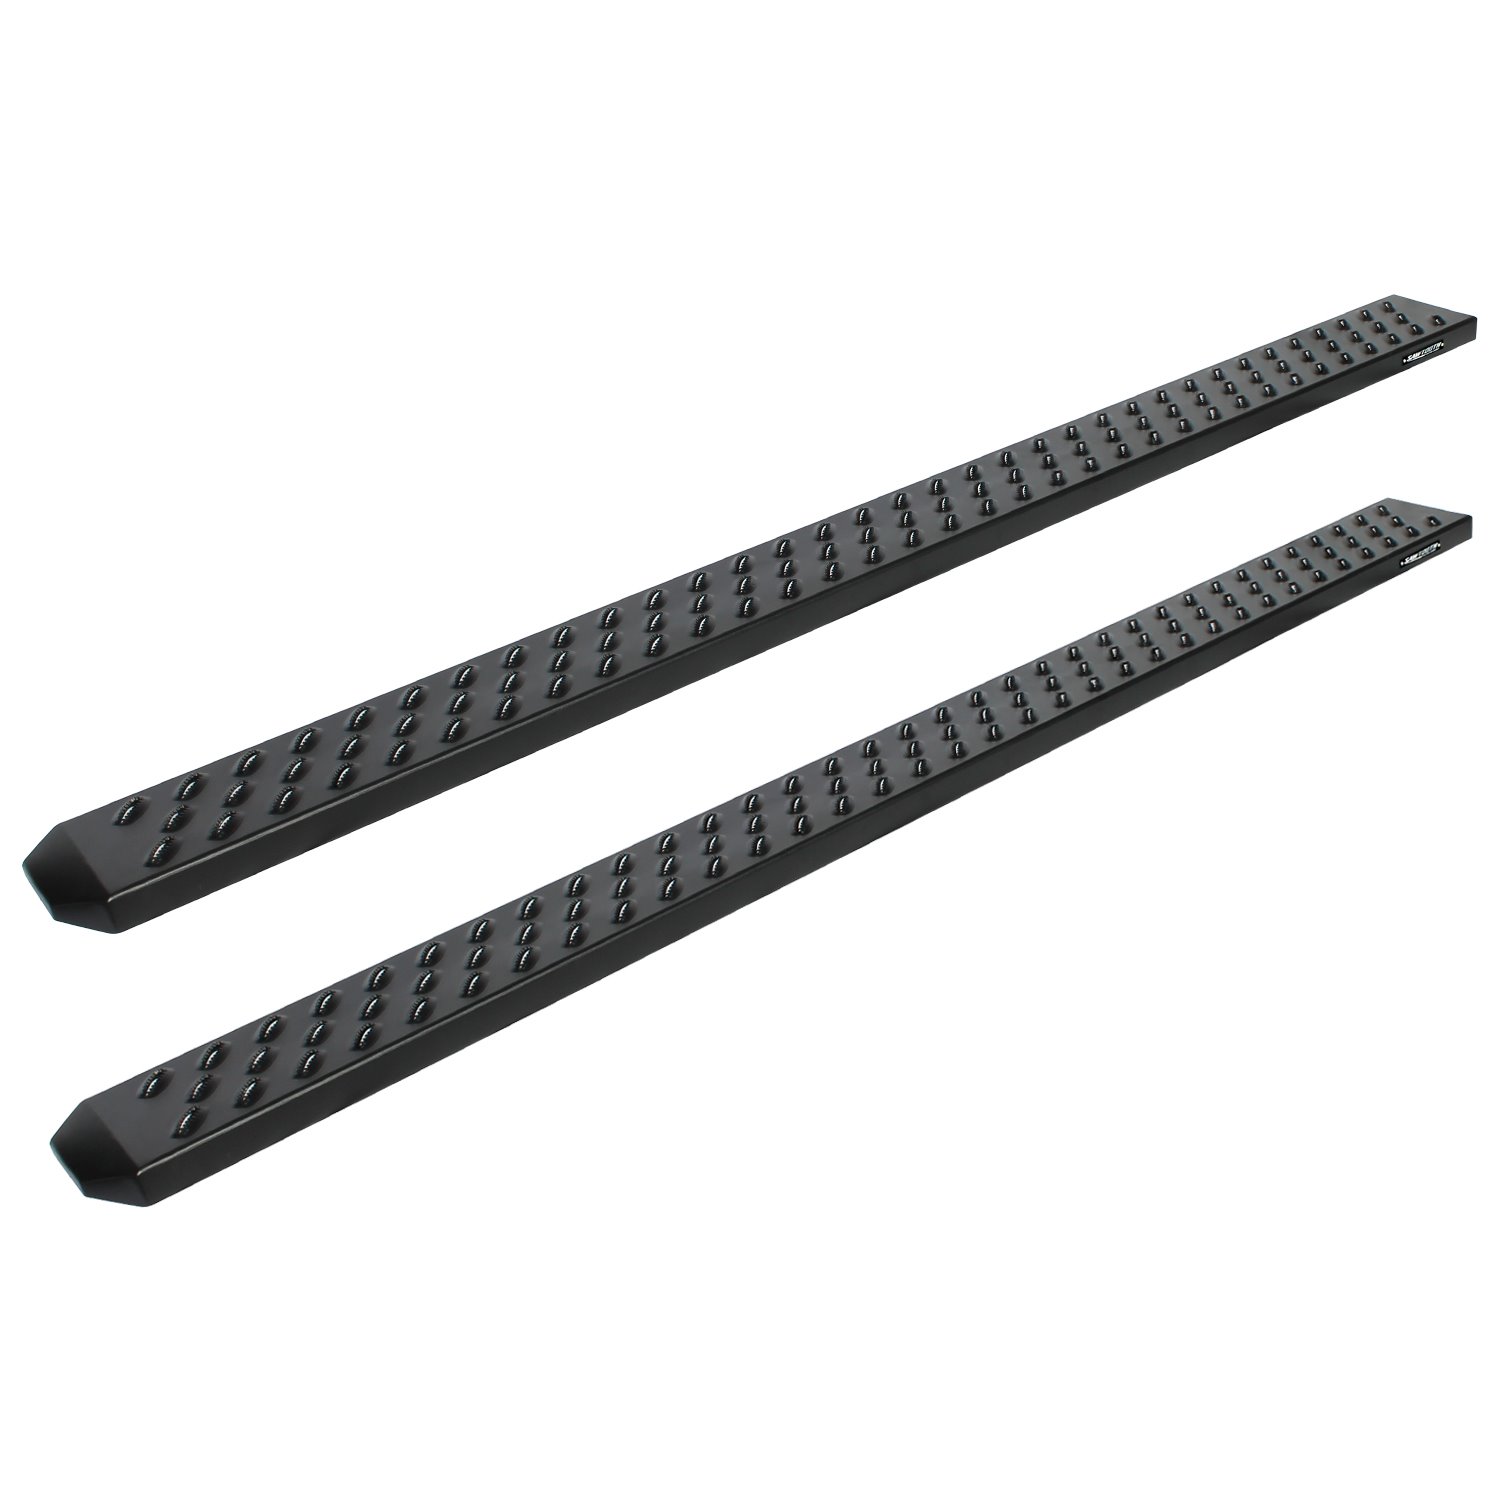 2104-0133BT 6.5 in Sawtooth Slide Track Running Boards, Black Aluminum, Fits Select Toyota Tundra Double Cab